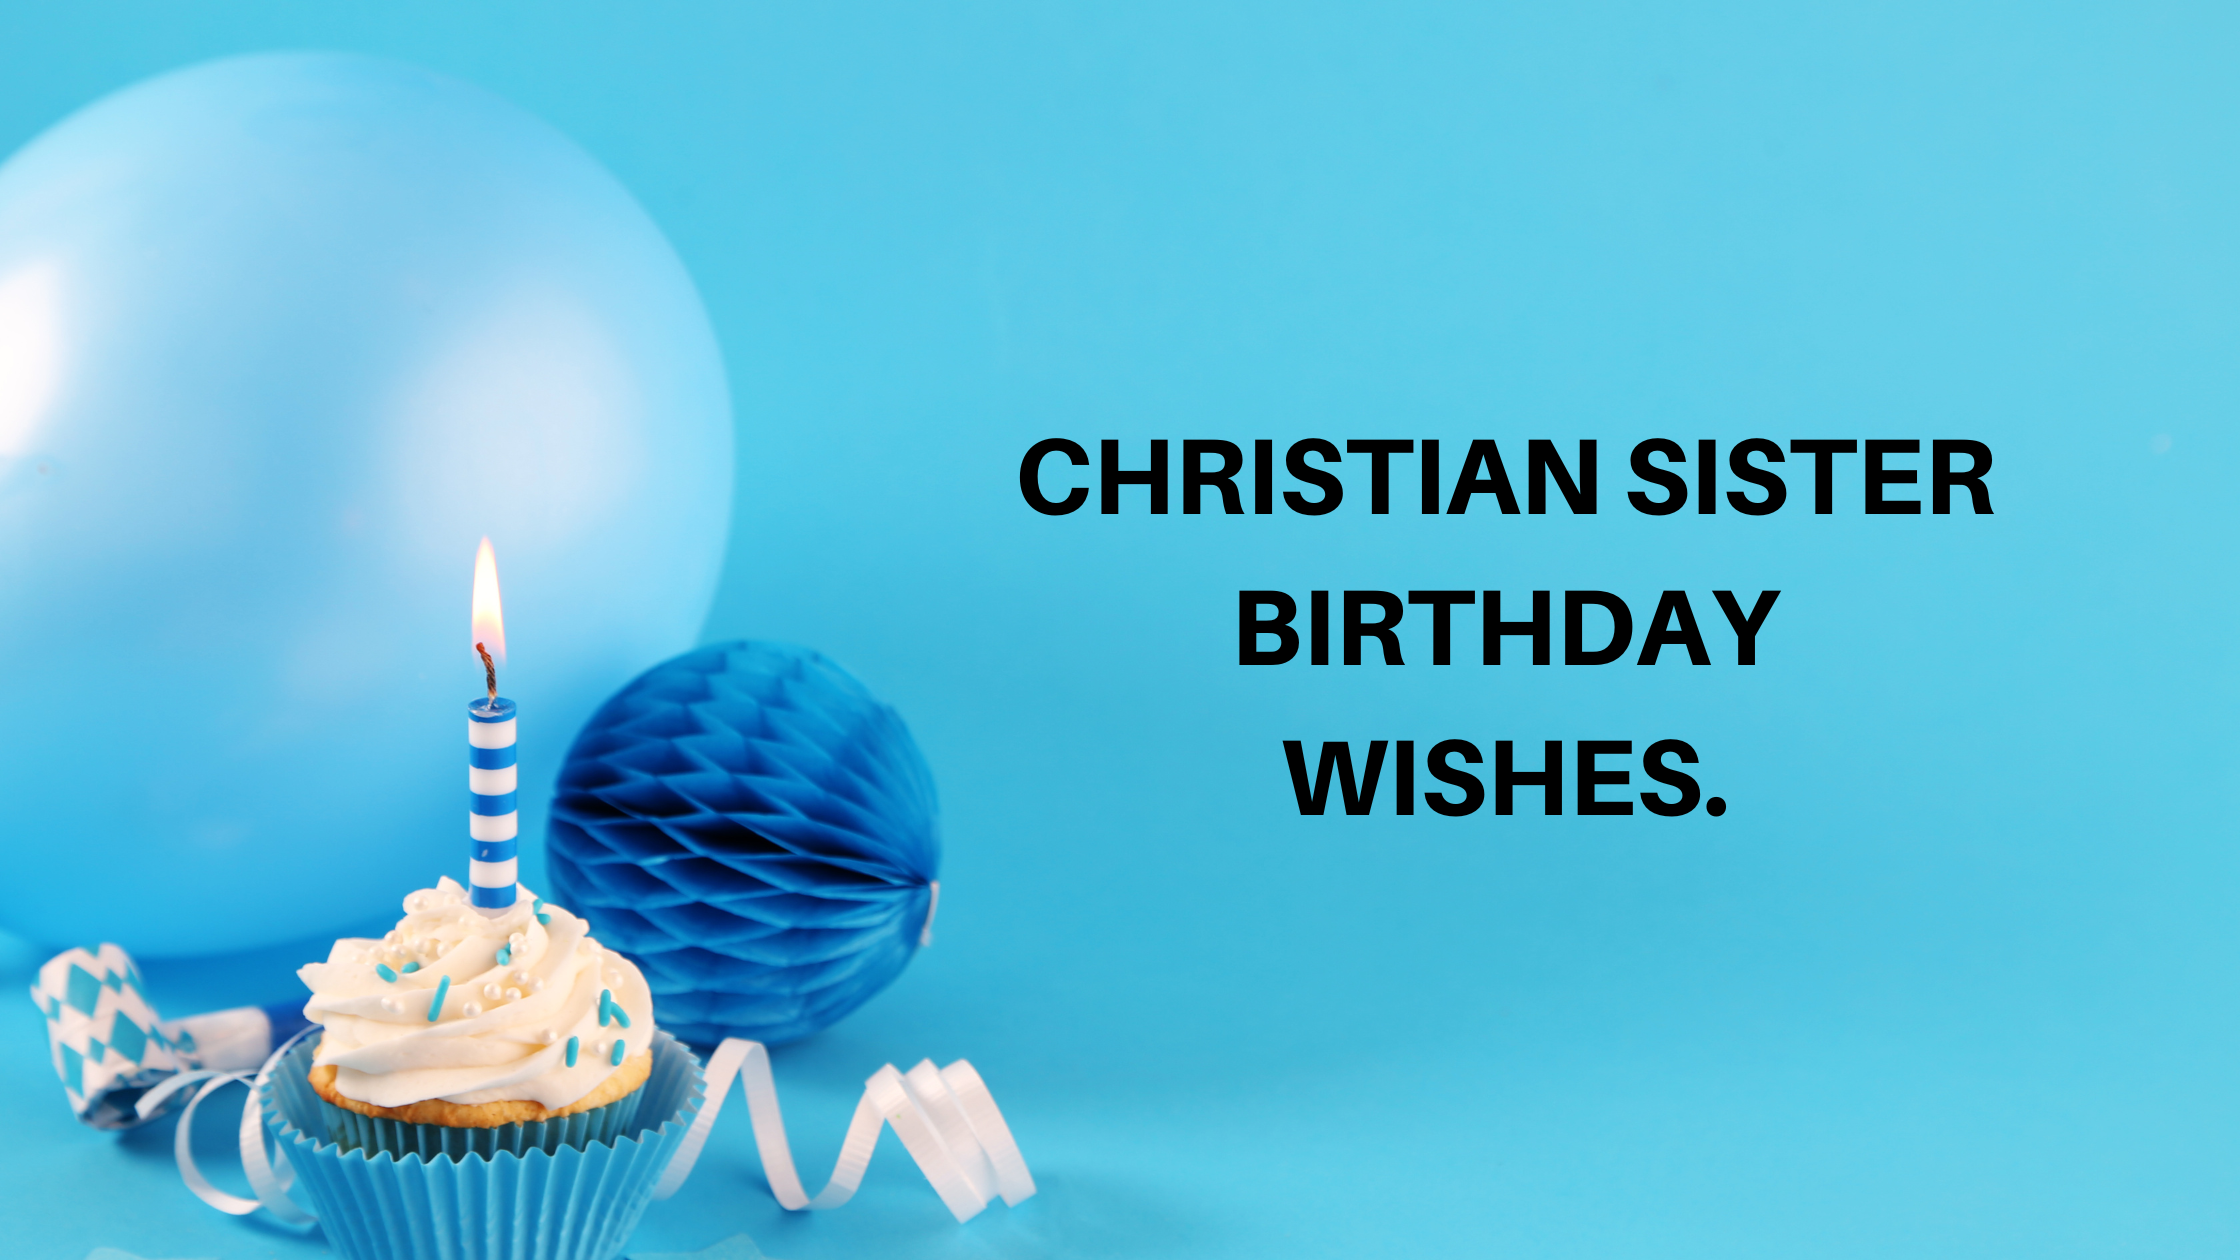 Christian Sister Birthday Wishes